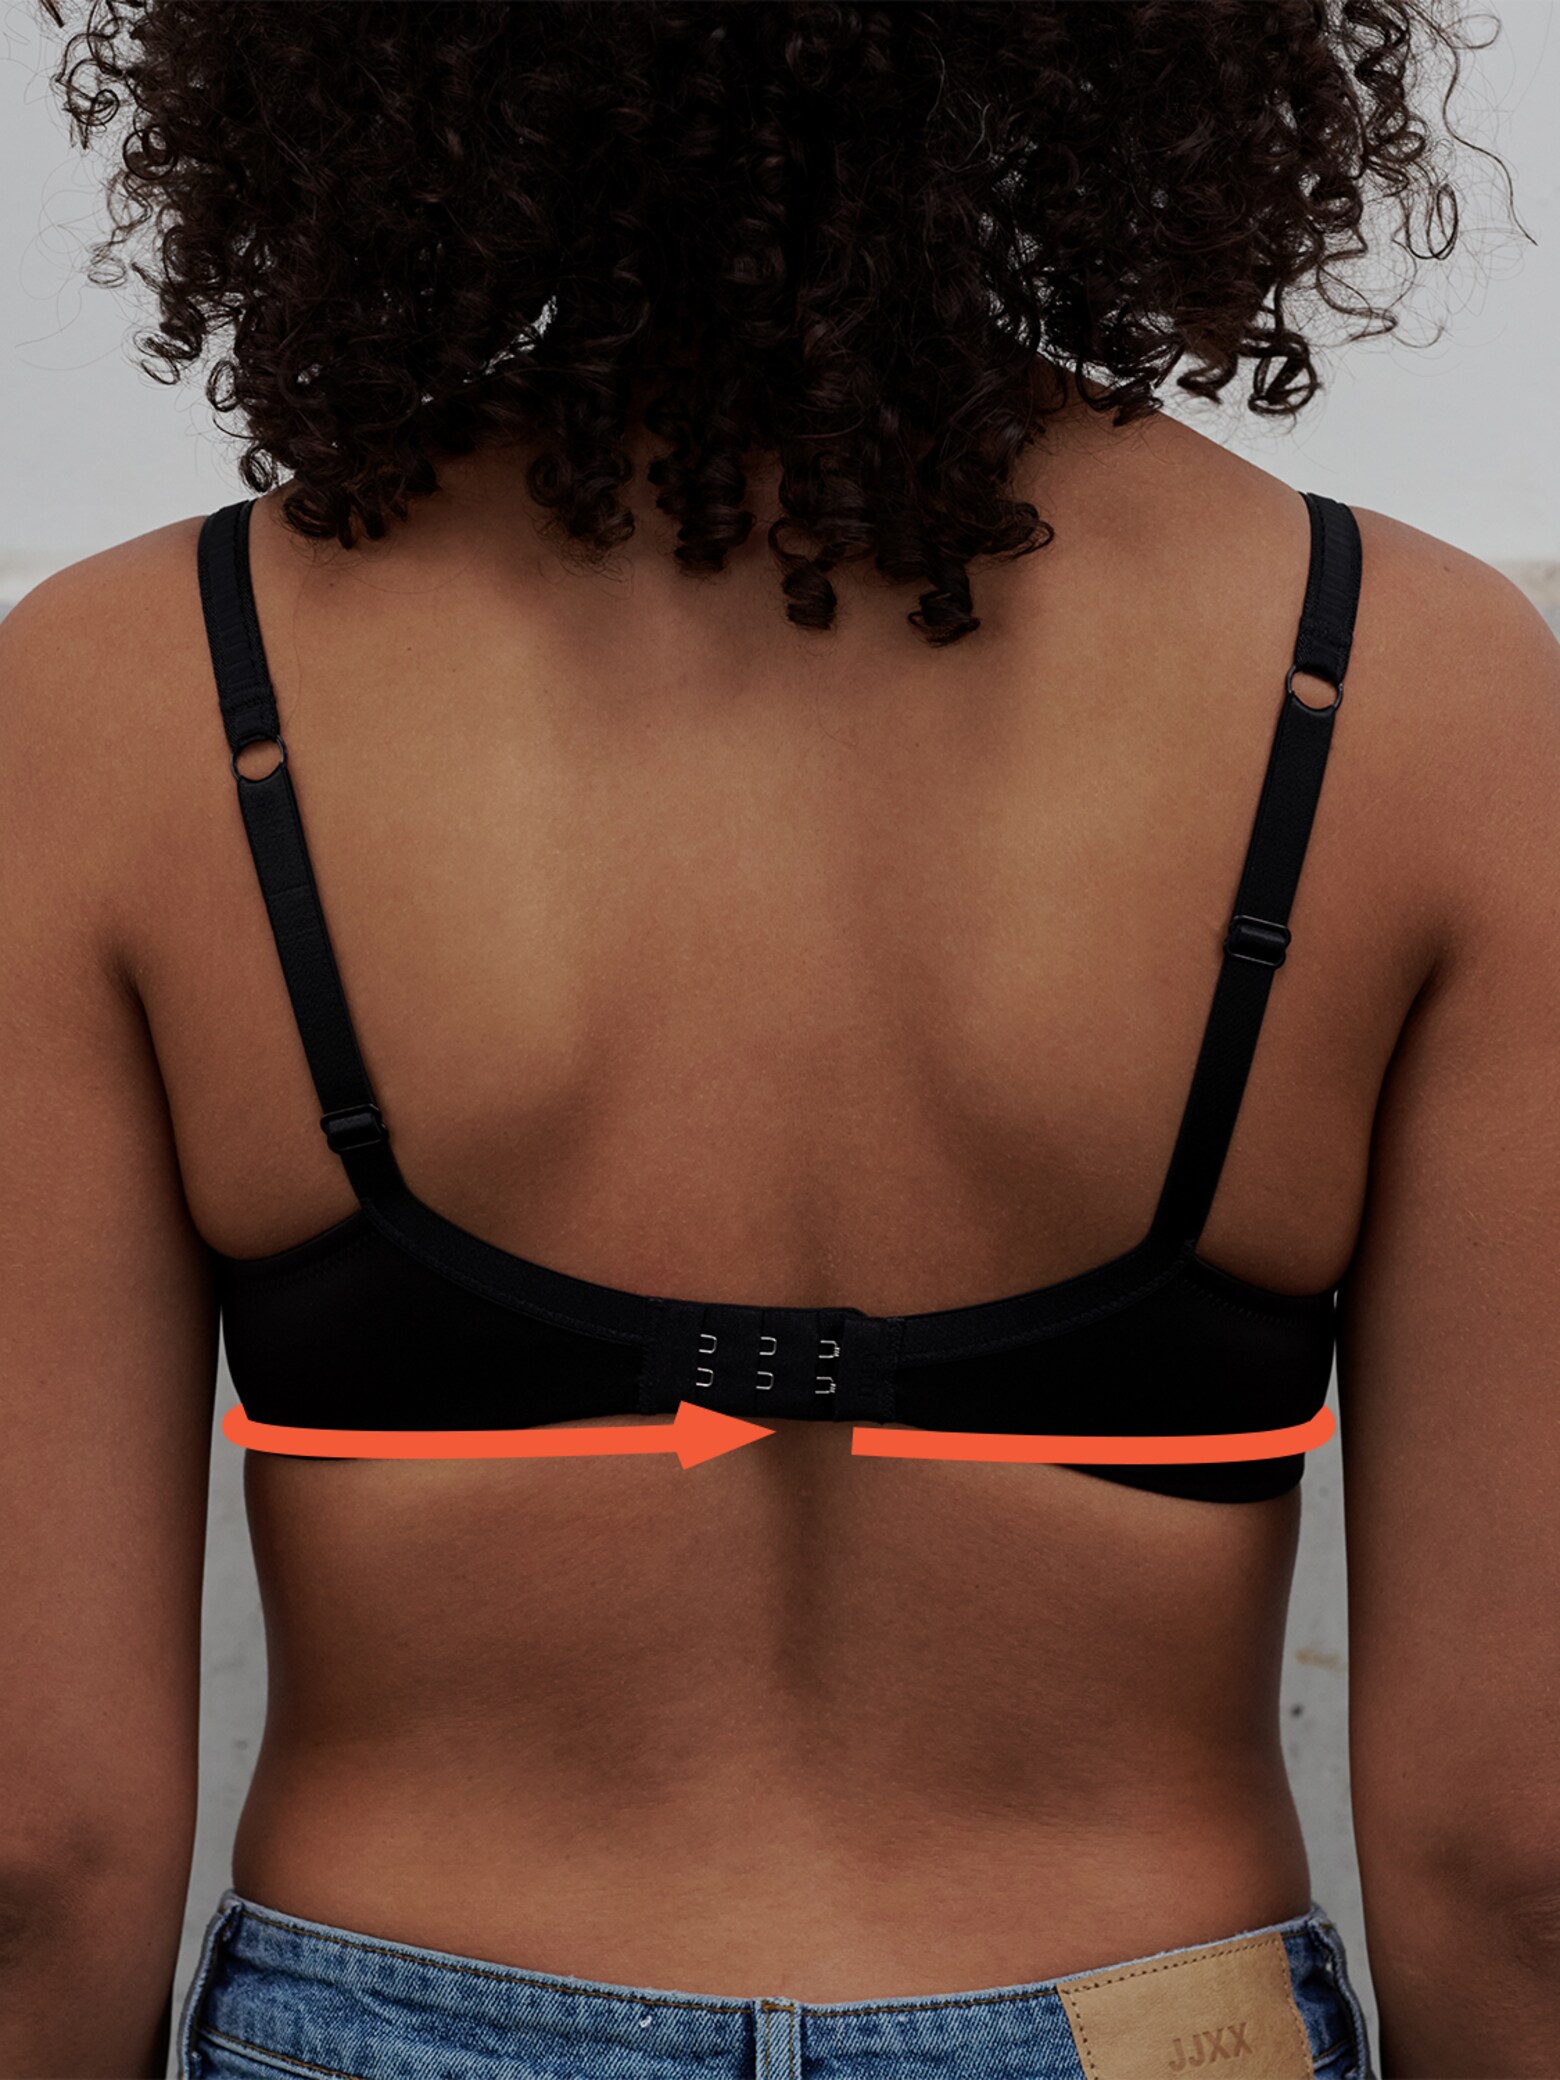 Perfectly fitting bras Our bra size finder